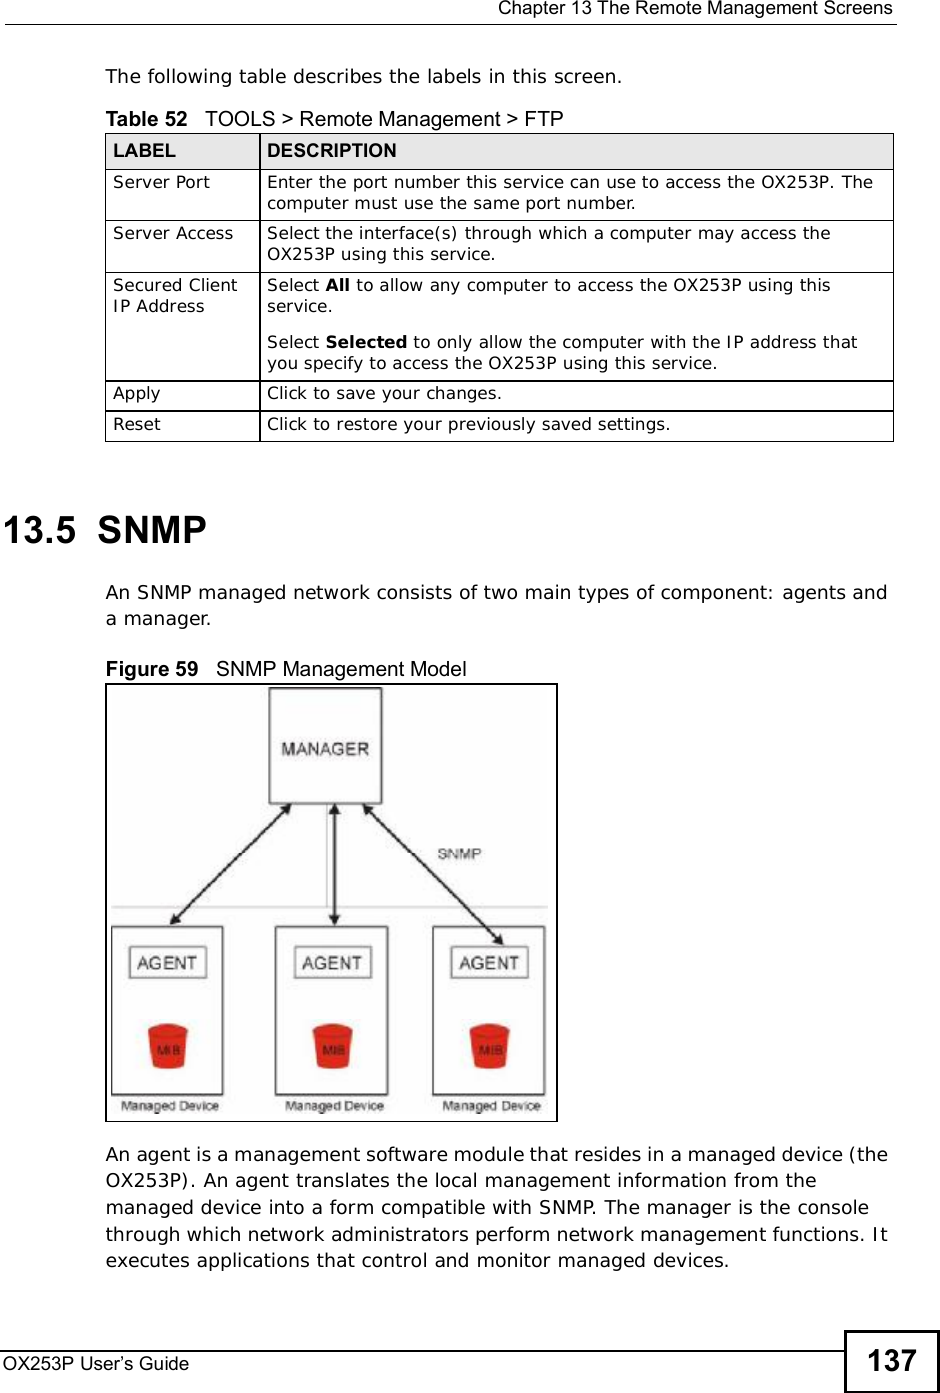  Chapter 13The Remote Management ScreensOX253P User’s Guide 137The following table describes the labels in this screen.13.5  SNMPAn SNMP managed network consists of two main types of component: agents and a manager.Figure 59   SNMP Management ModelAn agent is a management software module that resides in a managed device (the OX253P). An agent translates the local management information from the managed device into a form compatible with SNMP. The manager is the console through which network administrators perform network management functions. It executes applications that control and monitor managed devices. Table 52   TOOLS &gt; Remote Management &gt; FTPLABEL DESCRIPTIONServer Port Enter the port number this service can use to access the OX253P. The computer must use the same port number.Server Access Select the interface(s) through which a computer may access the OX253P using this service.Secured Client IP Address Select All to allow any computer to access the OX253P using this service.Select Selected to only allow the computer with the IP address that you specify to access the OX253P using this service.Apply Click to save your changes.Reset Click to restore your previously saved settings.